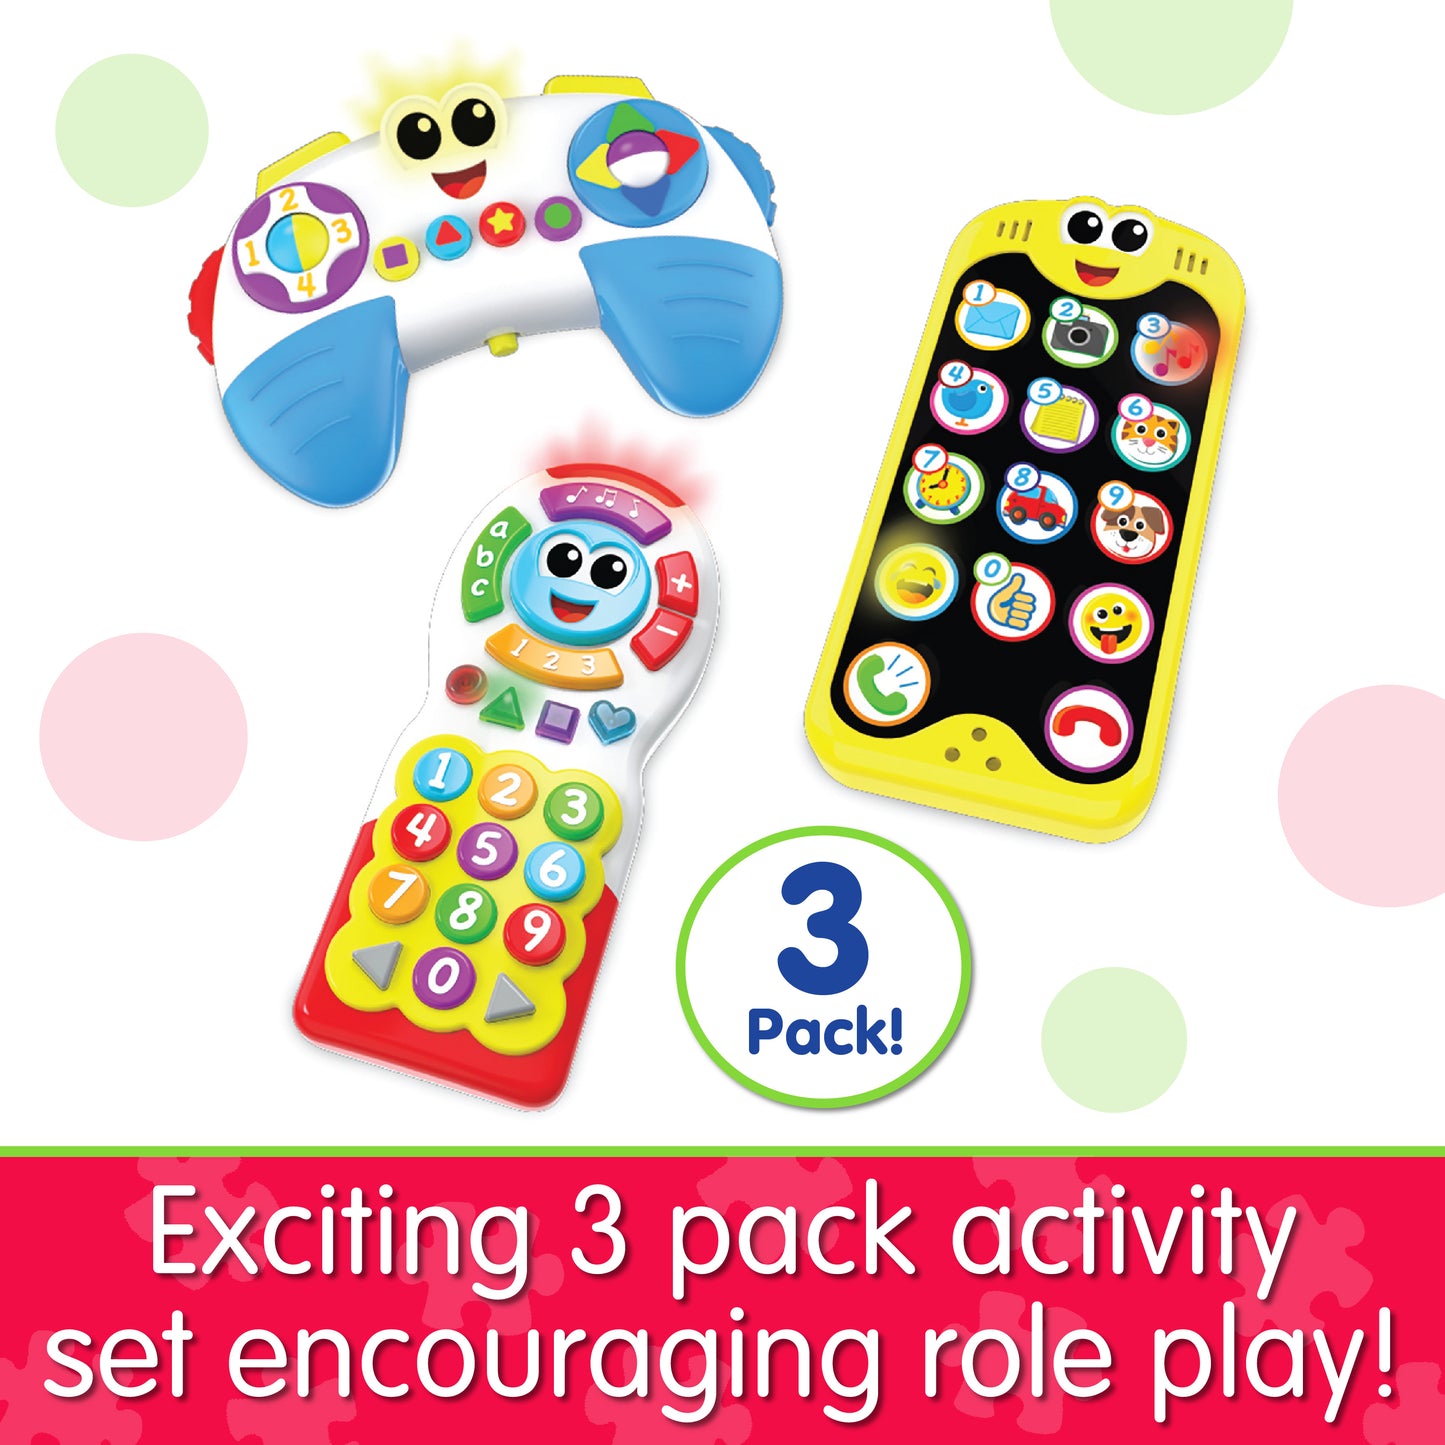 Infographic about On The Go 3 Pack Set that says, "Exciting 3 pack activity set encouraging role play!"